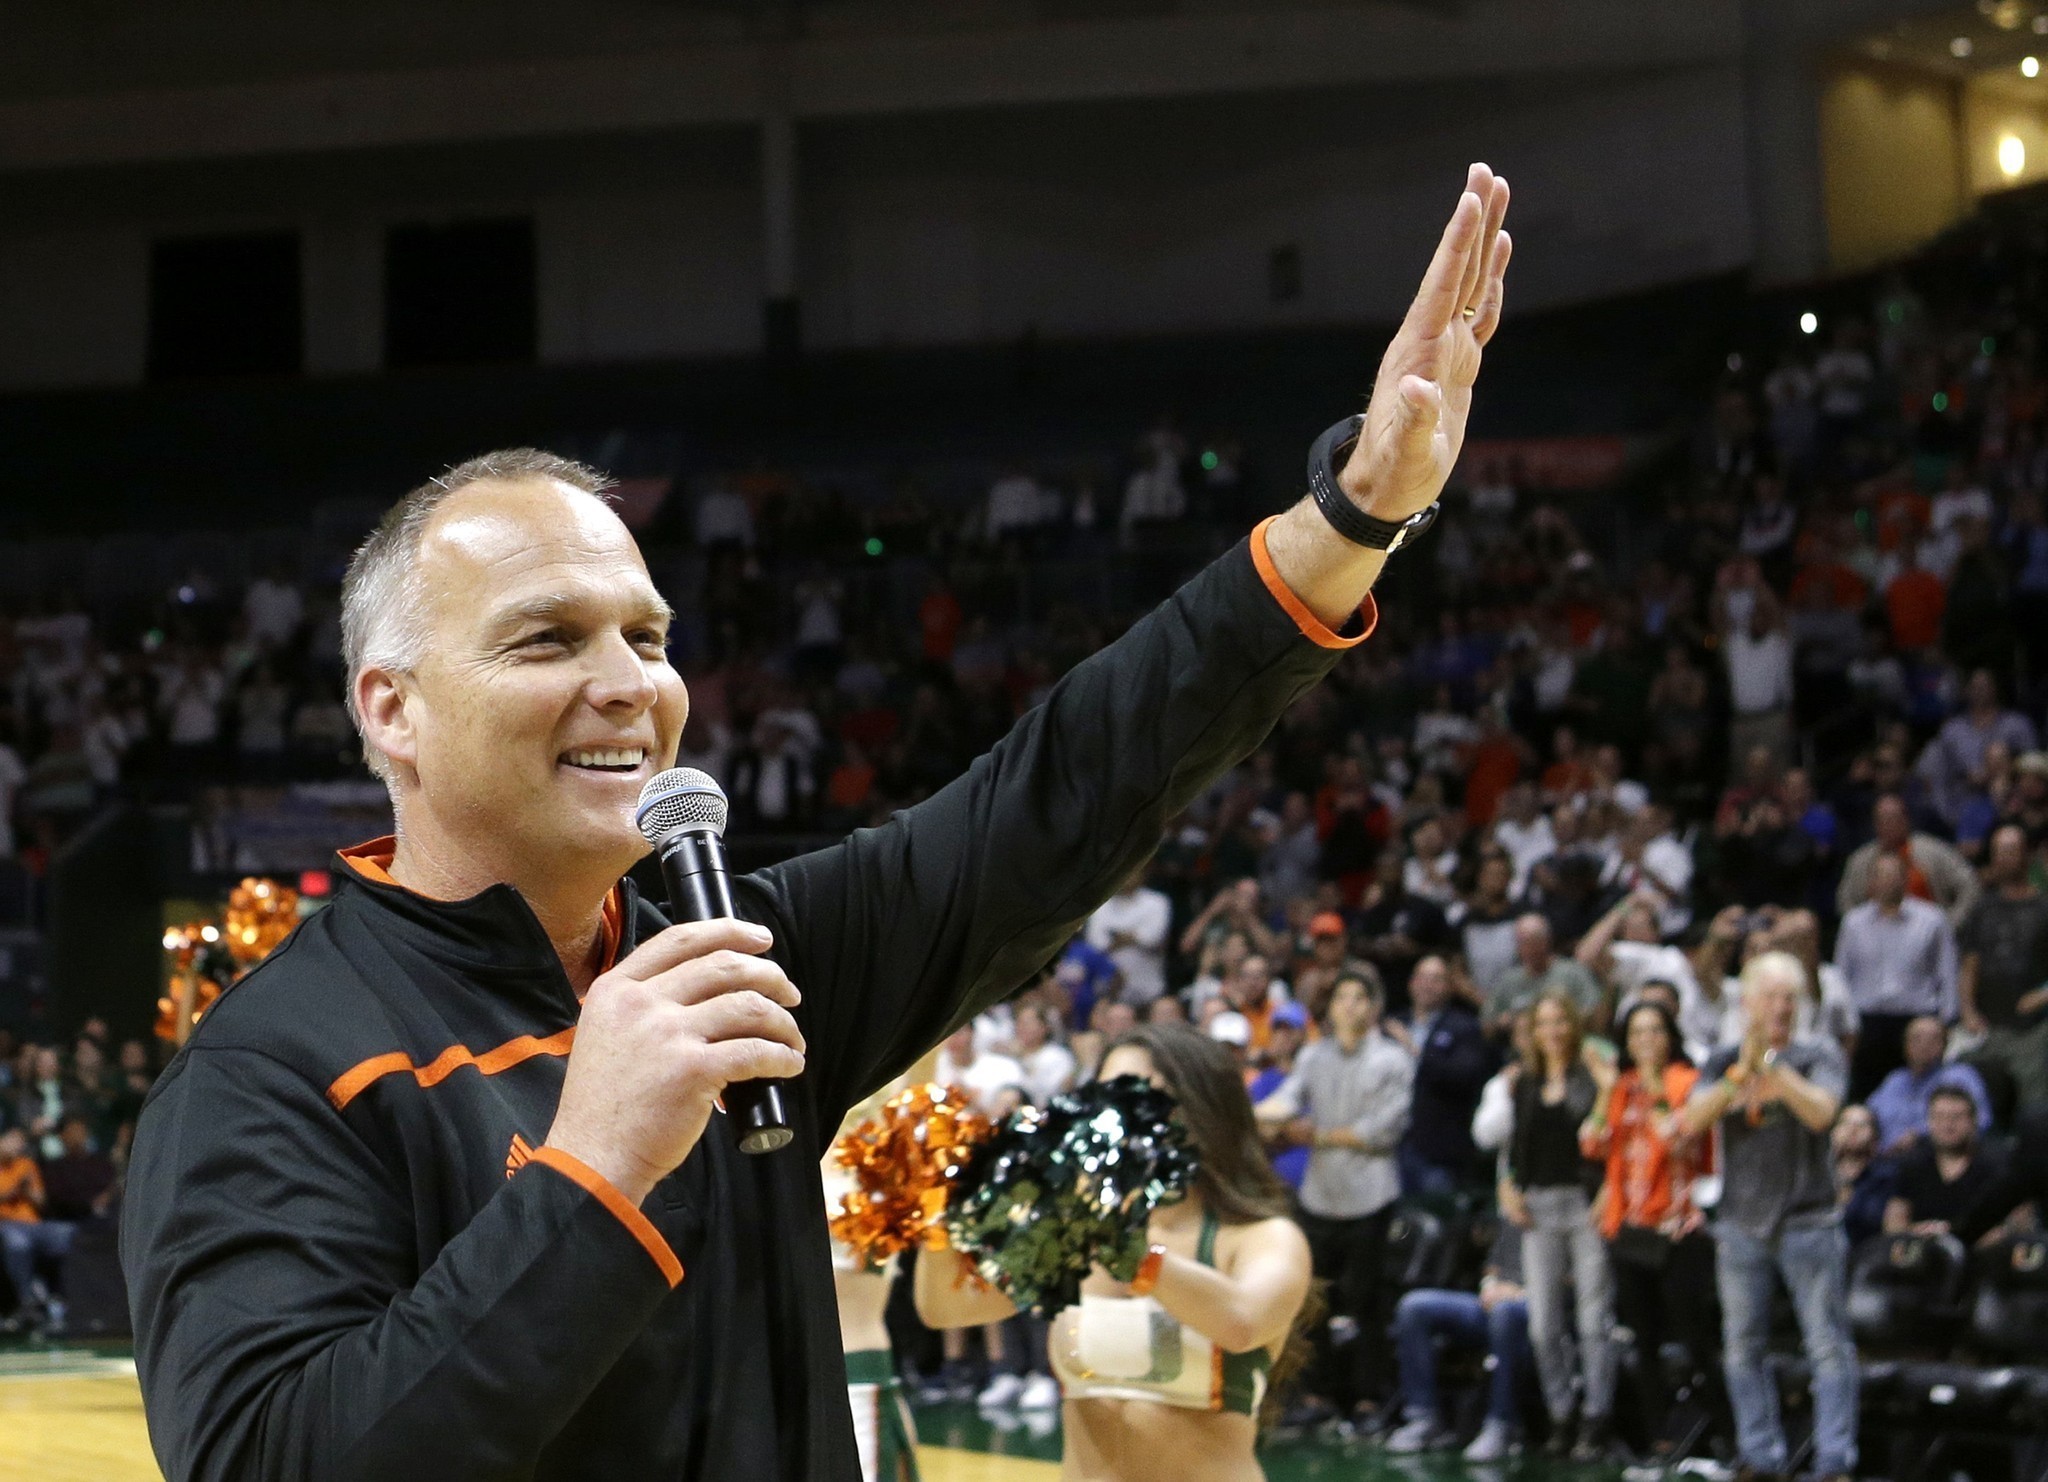 ‘He can change people’s lives’ …More on Hurricanes coach Mark Richt – Sun Sentinel